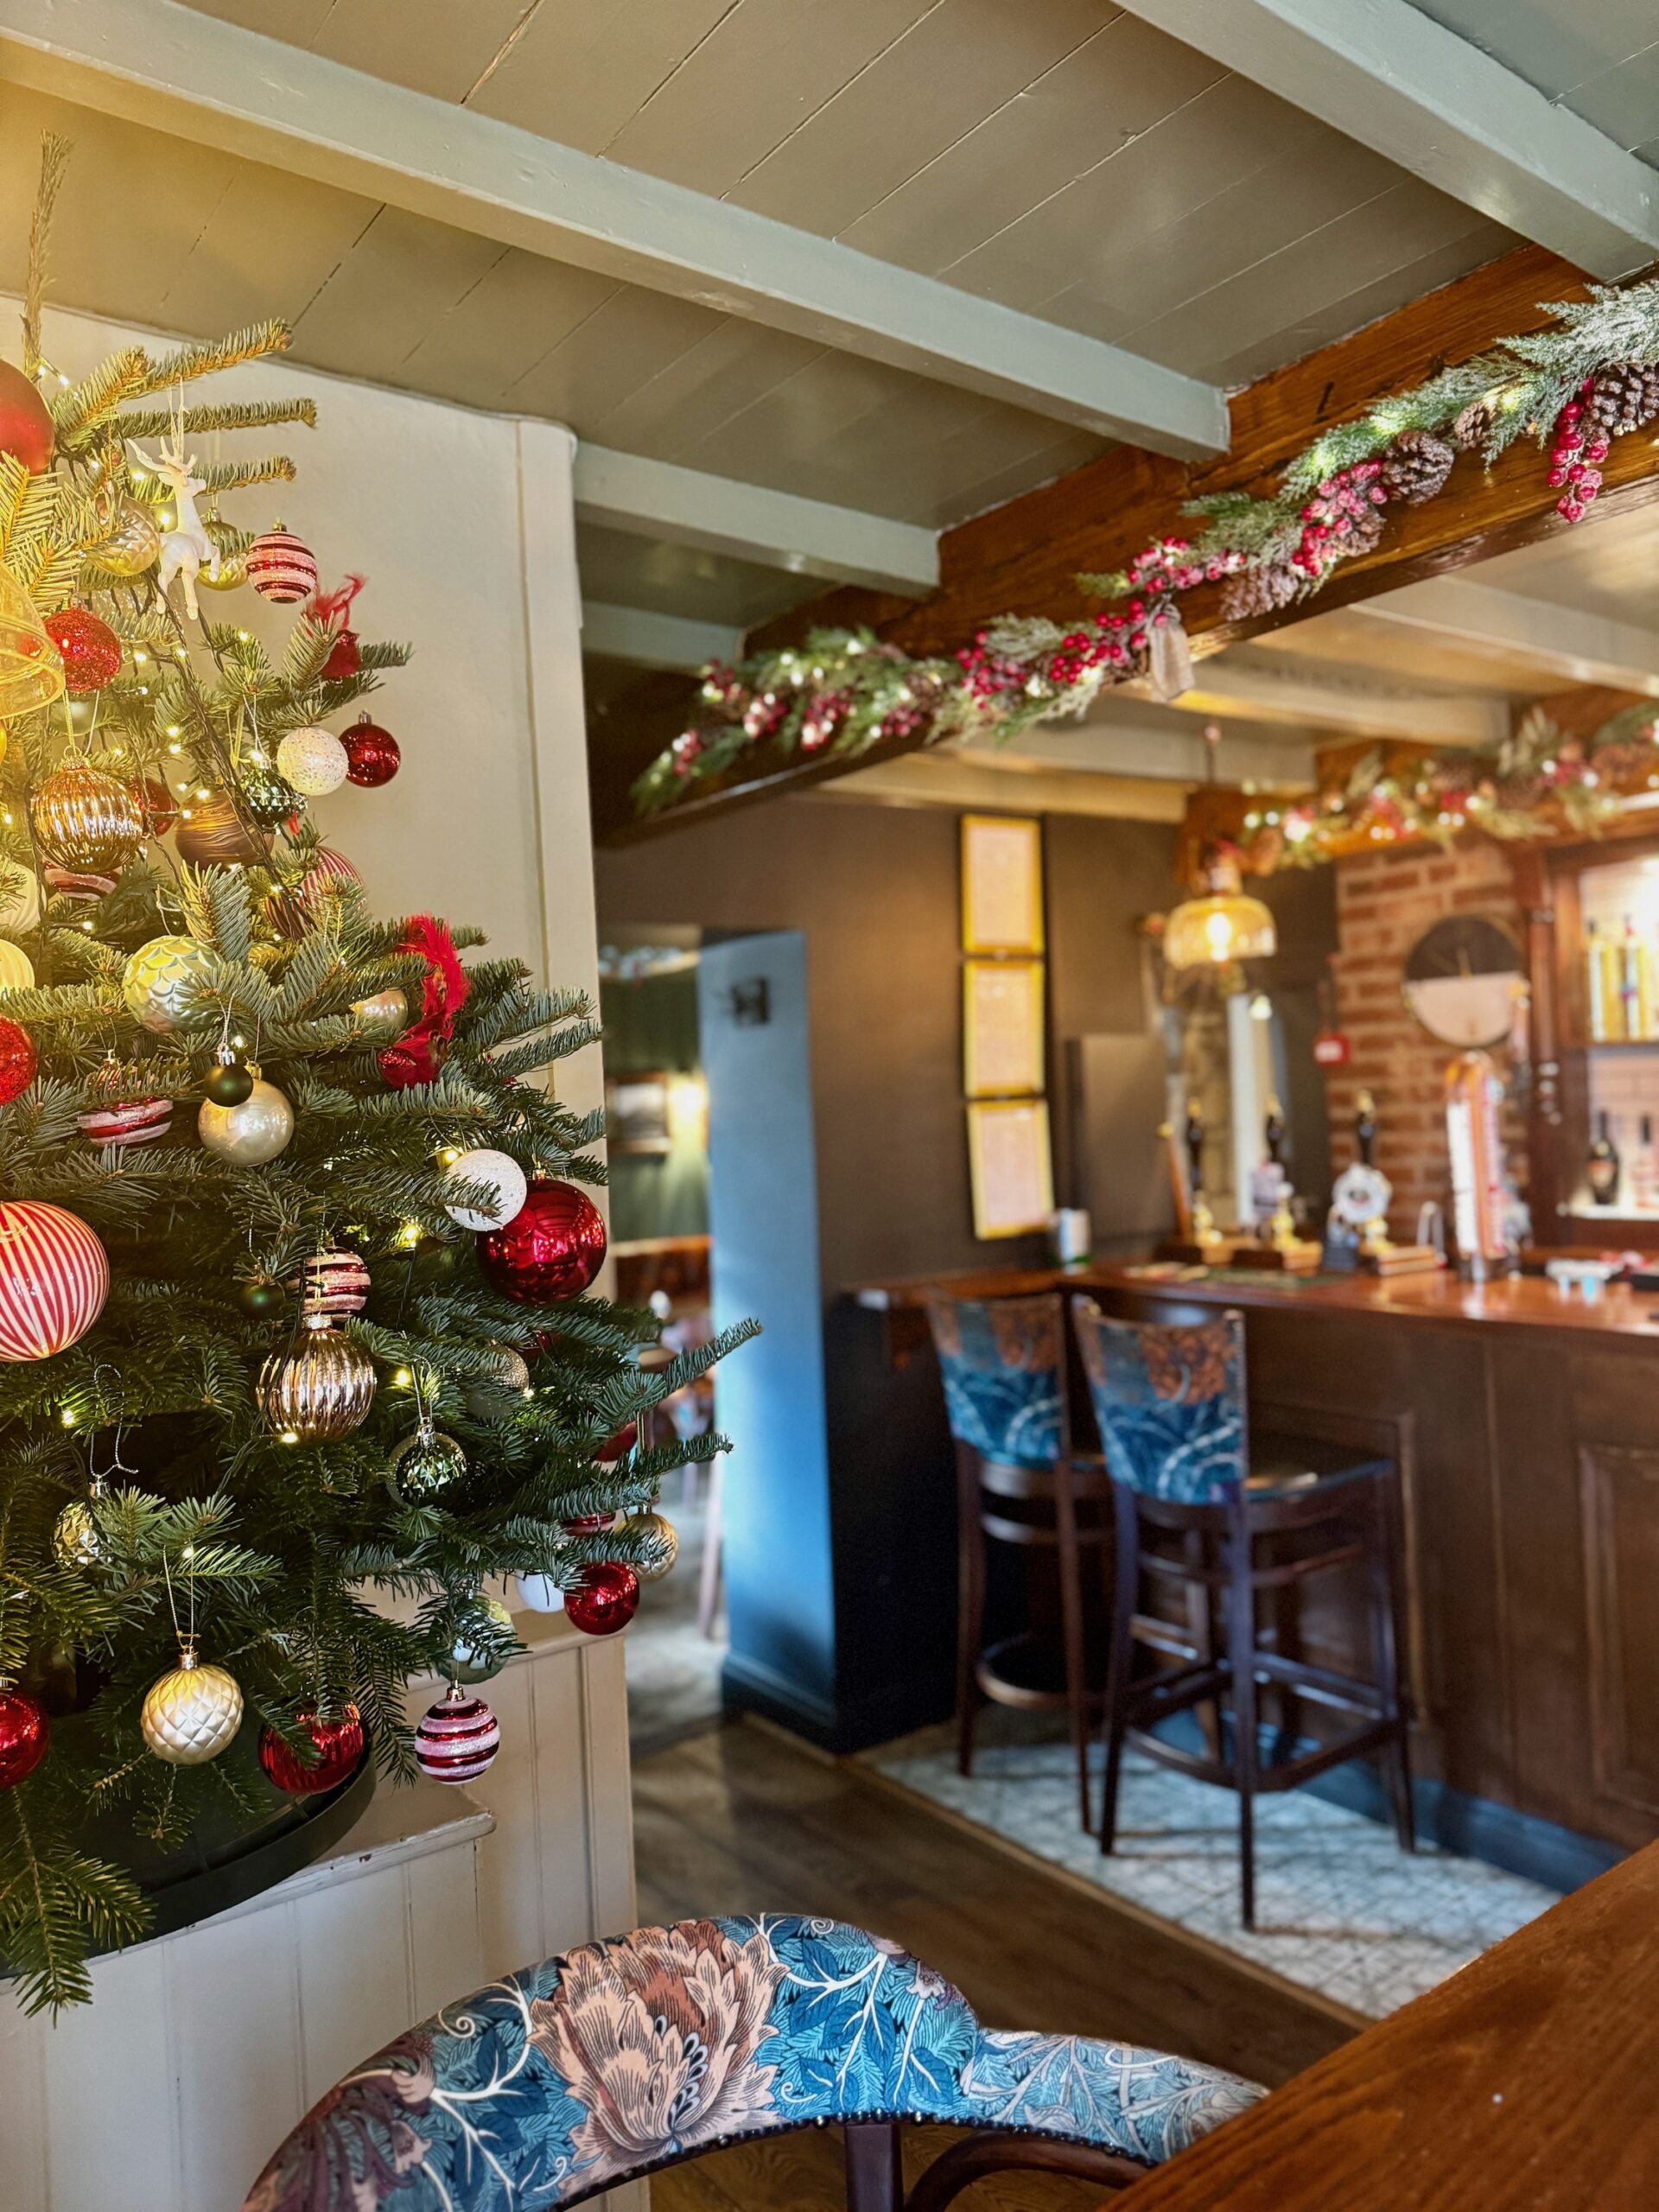 The Farmers Boy bar decorated for Christmas with tree, garlands and lights